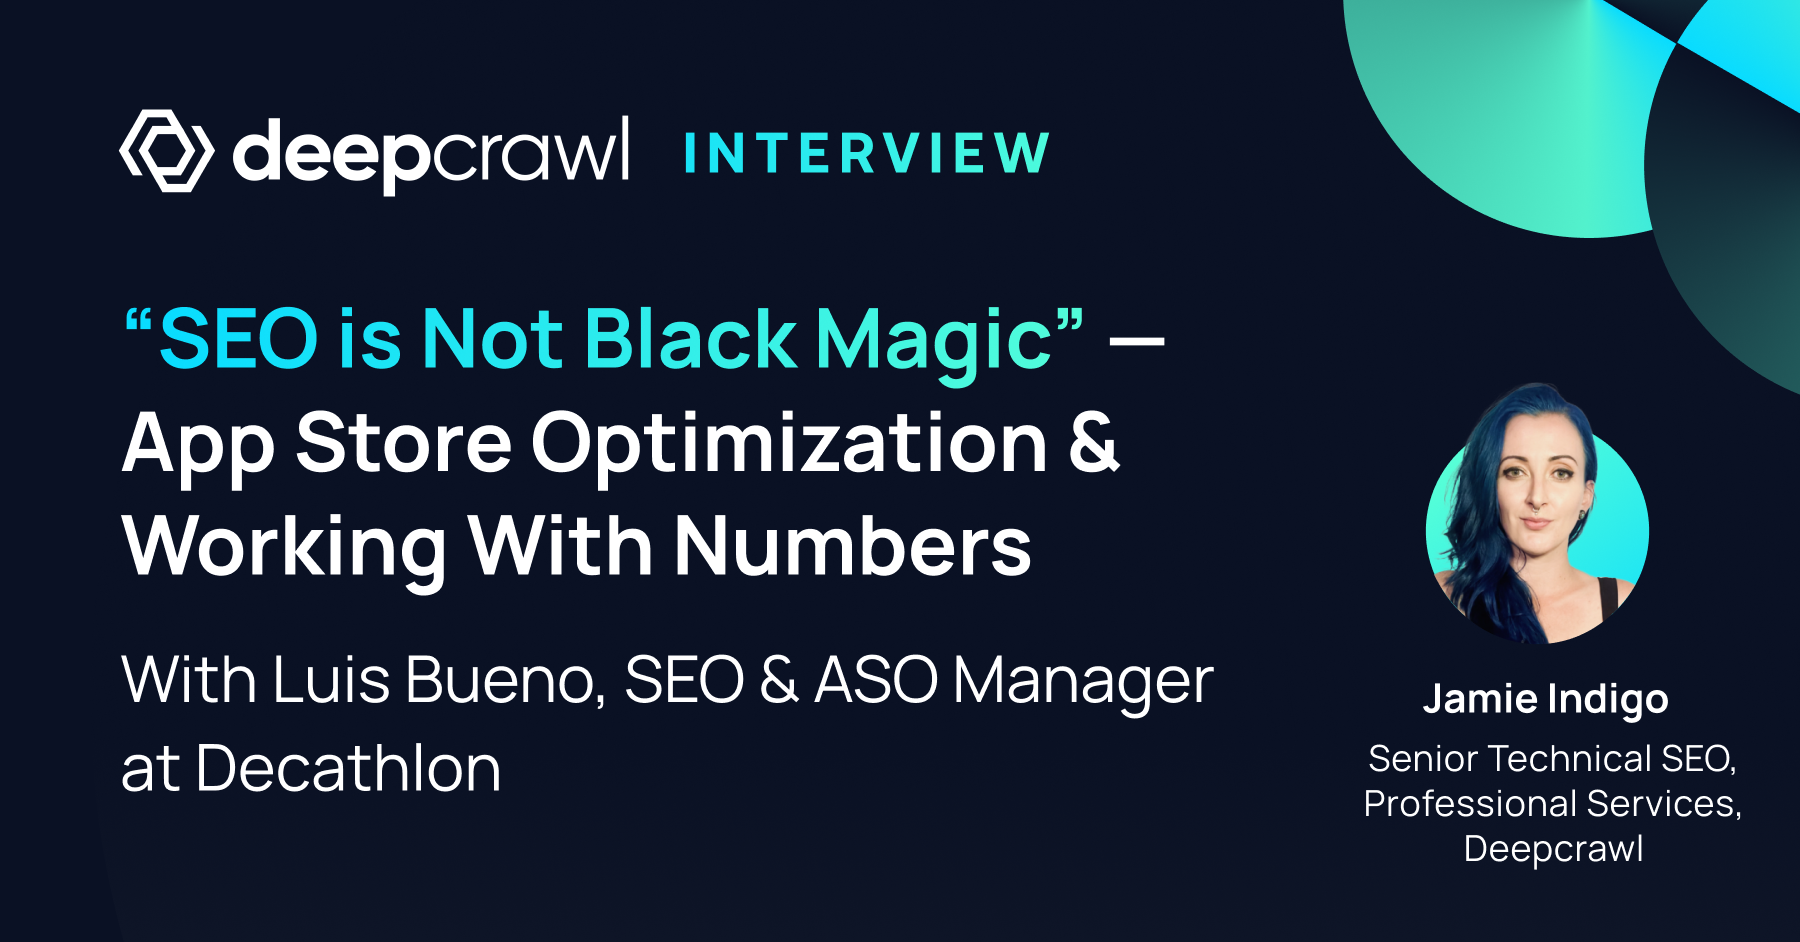 SEO Interview Series by Deepcrawl — discussing App Store Optimization, ASO, and working with numbers as an SEO with Luis Bueno